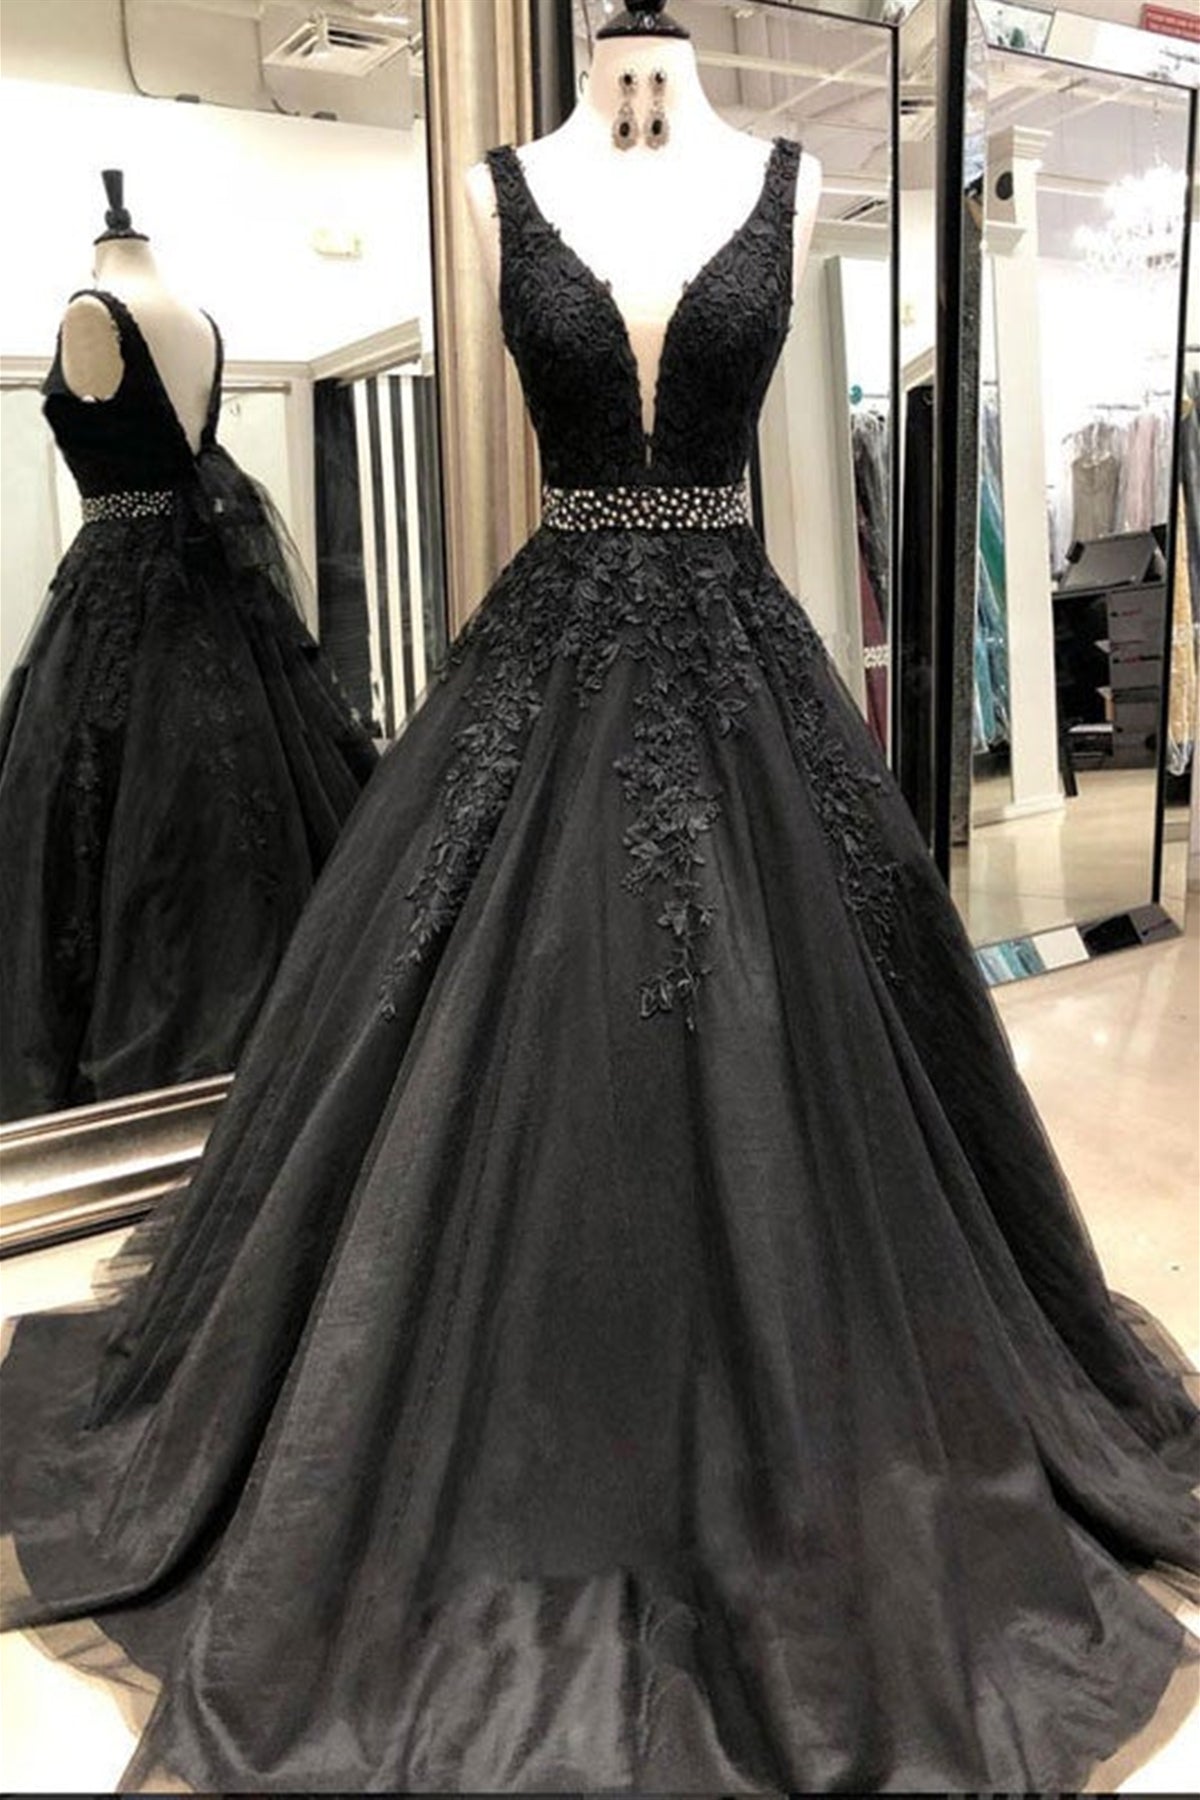 V Neck Black Lace Long Prom Dresses with Belt, V Neck Black Formal Evening Dresses, Black Lace Ball Gown